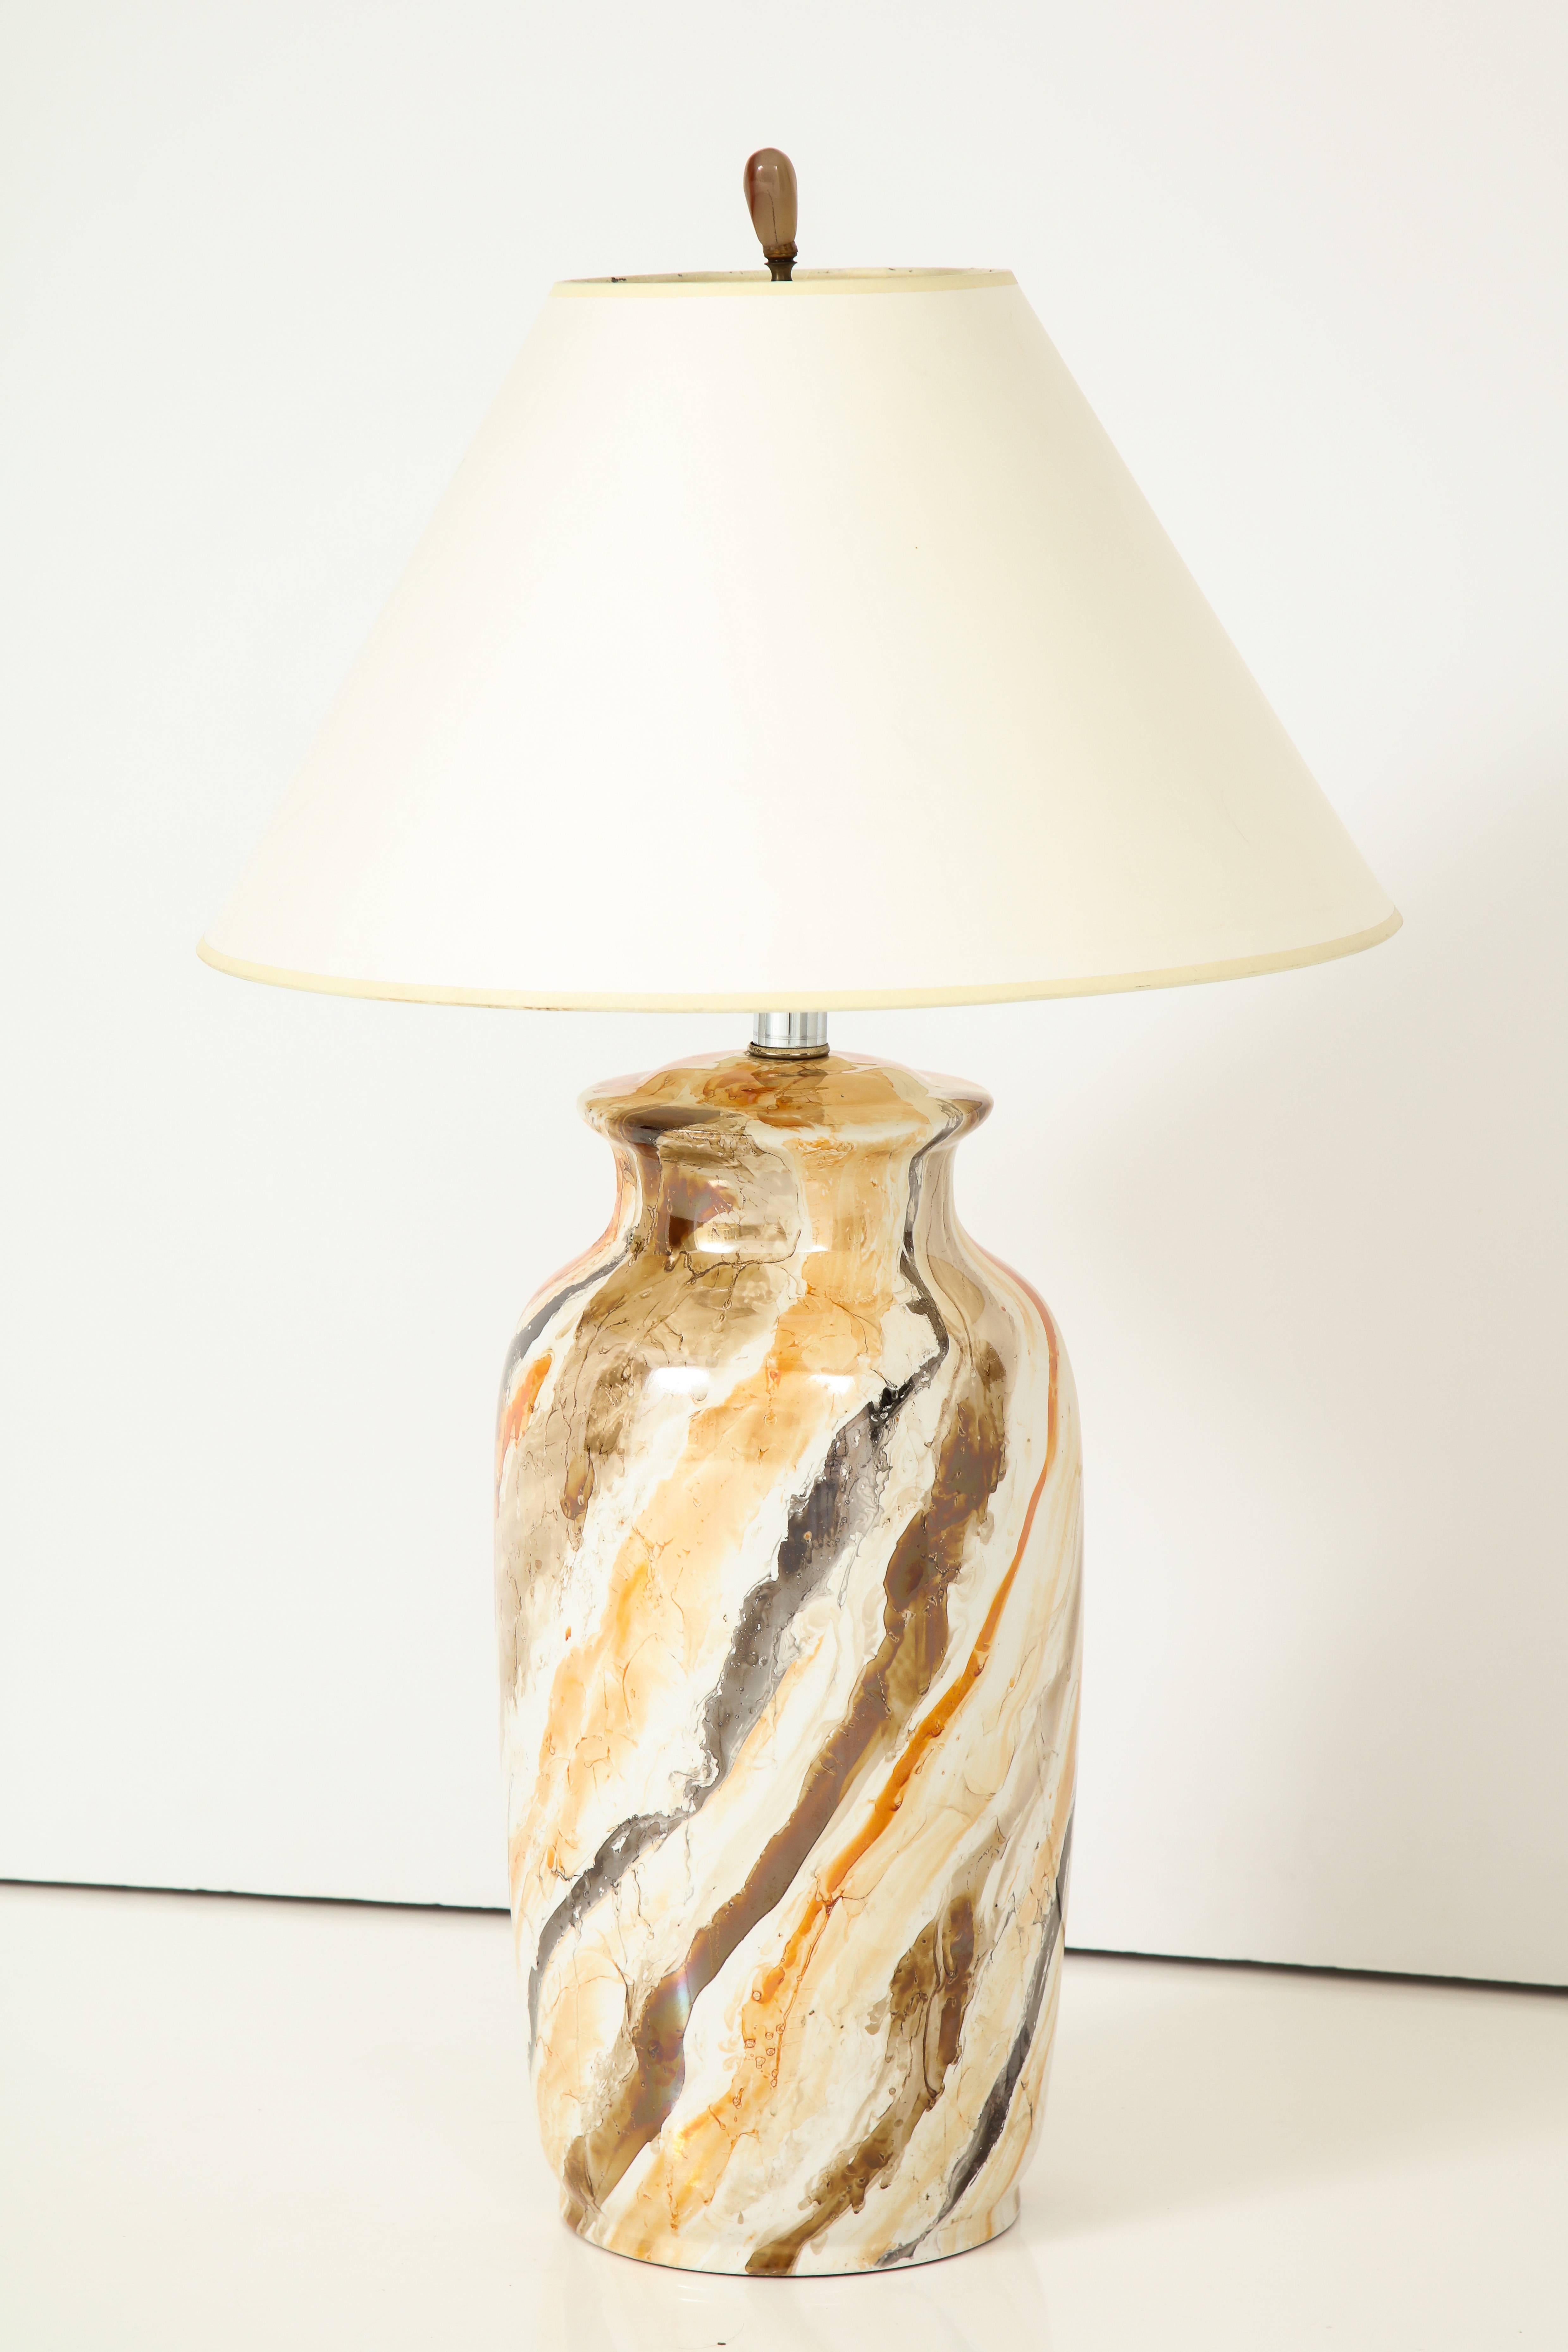 A 1970s glazed ceramic baluster form table lamp with lustrous cream, white, brown, gold and orange glaze; with its original ceramic finial.
American, circa 1970
Size: 28